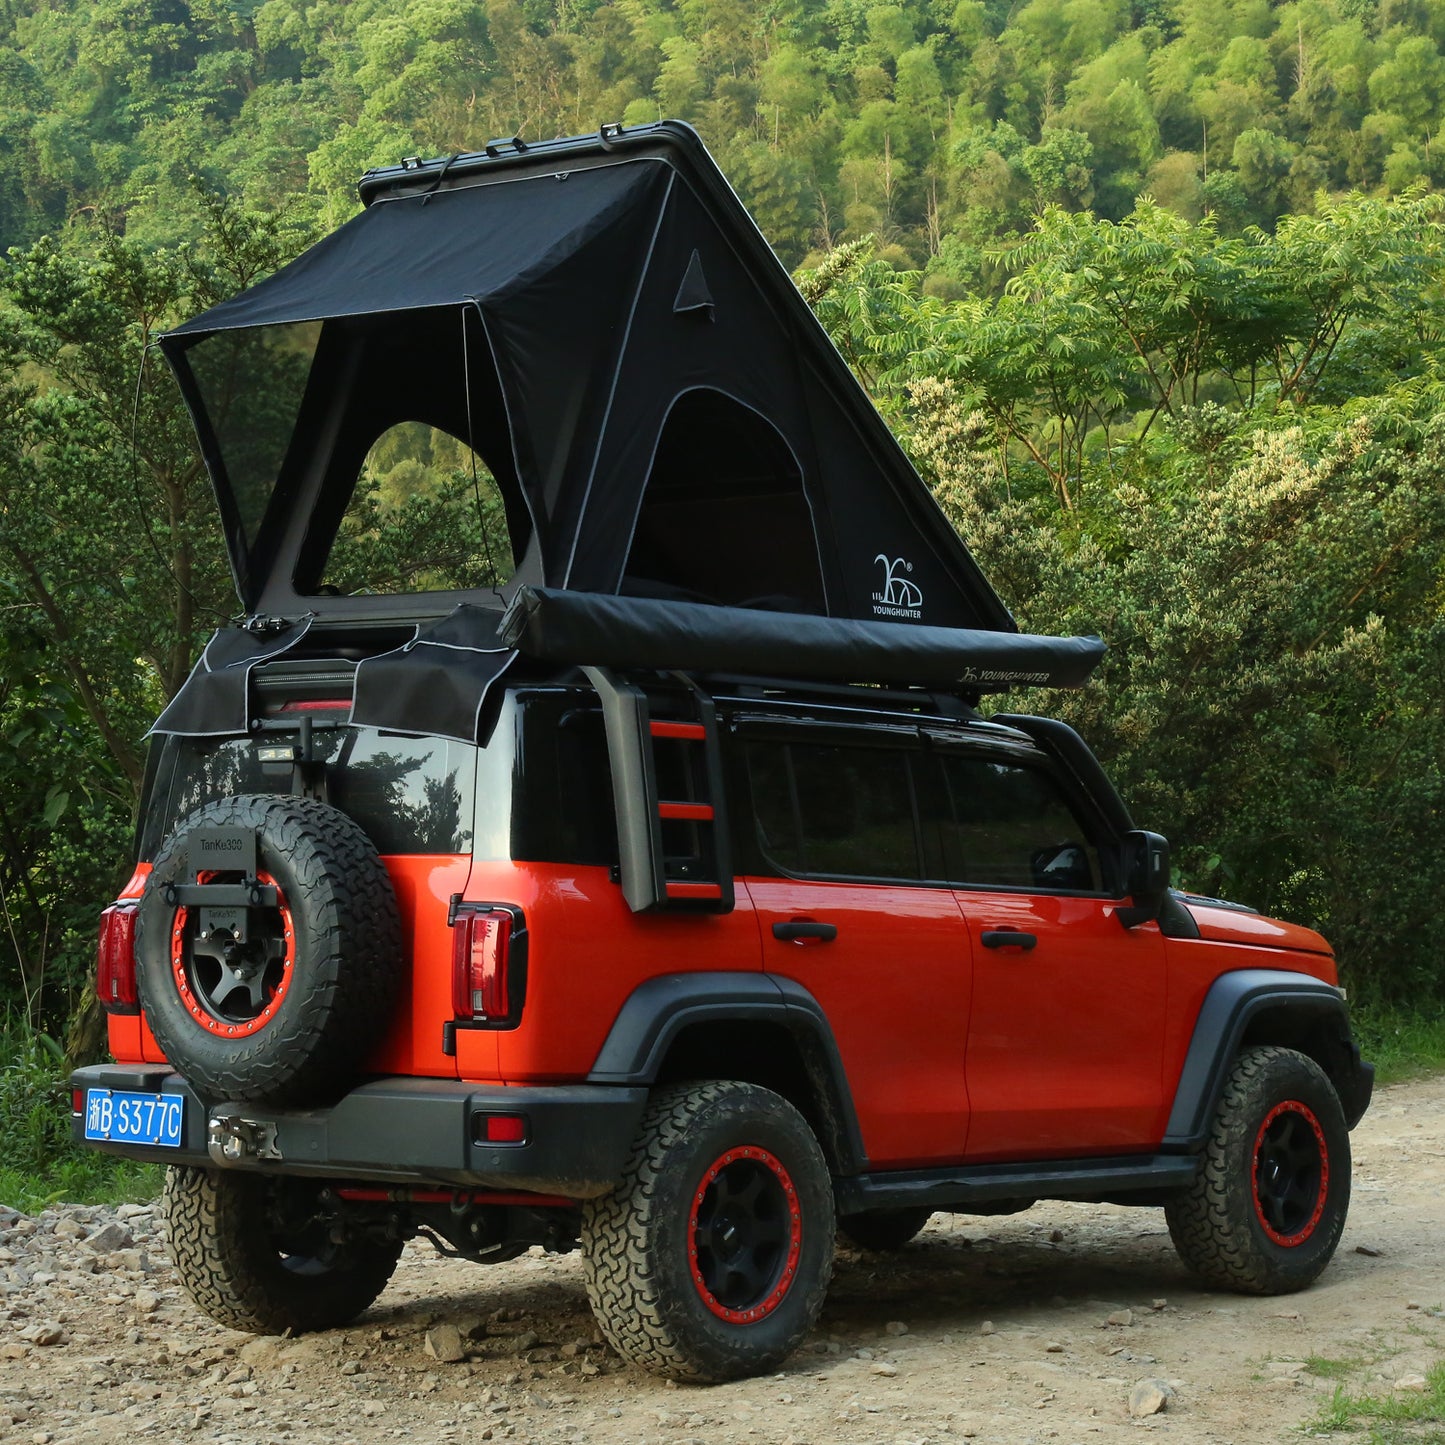 4x4 Camping car truck pop up triangle hardshell rooftop tent